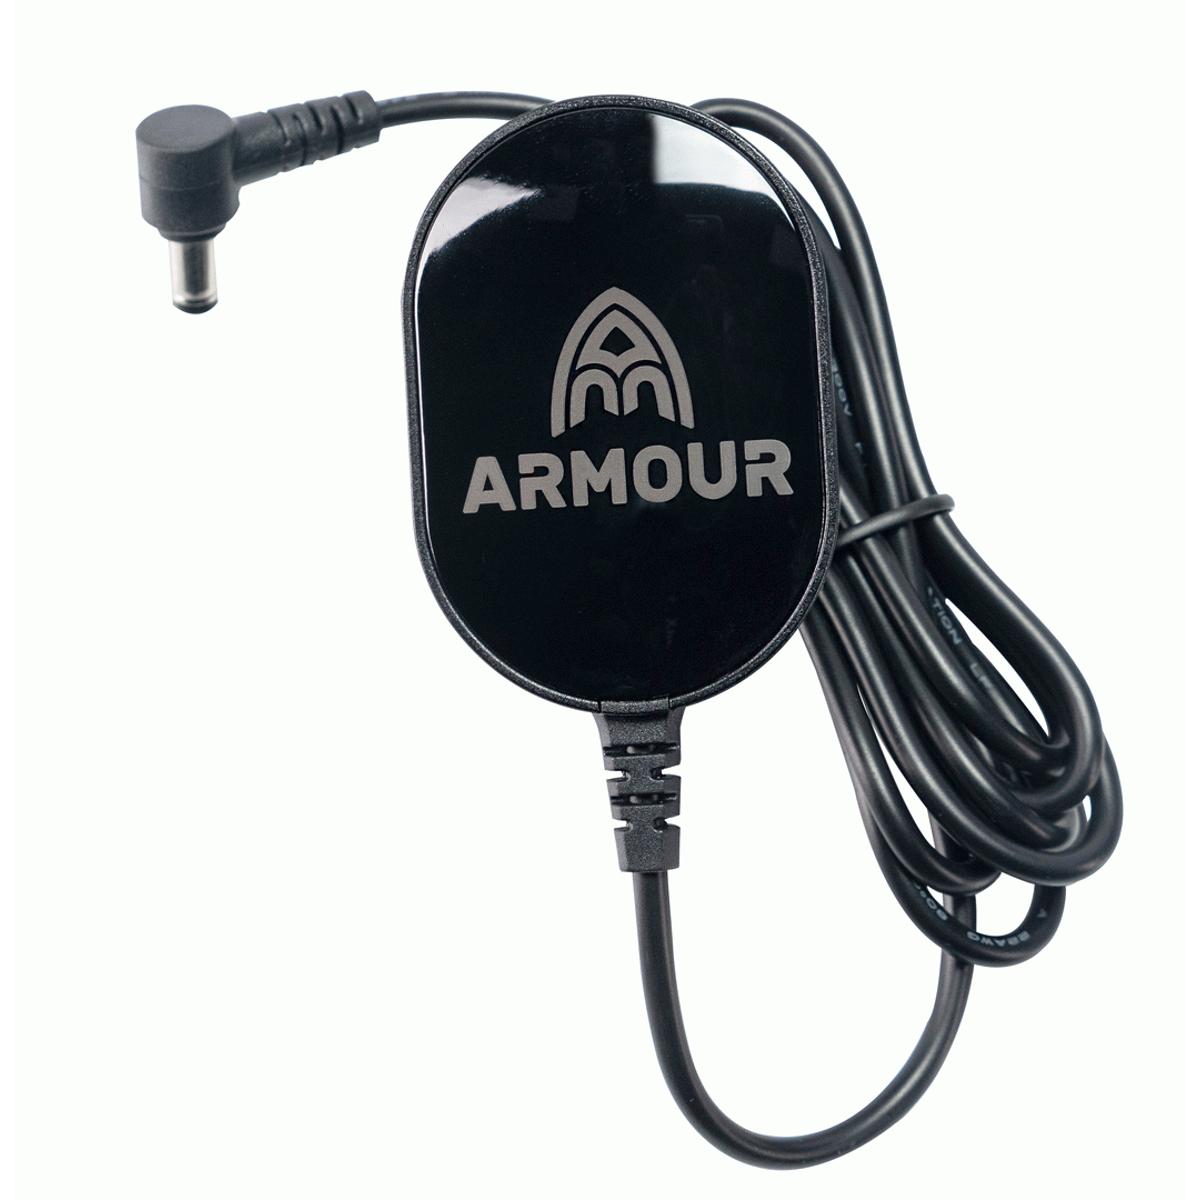 Armour Powersource 2 9V 15A Pedal Power Supply w/ 8-Way Daisy Chain